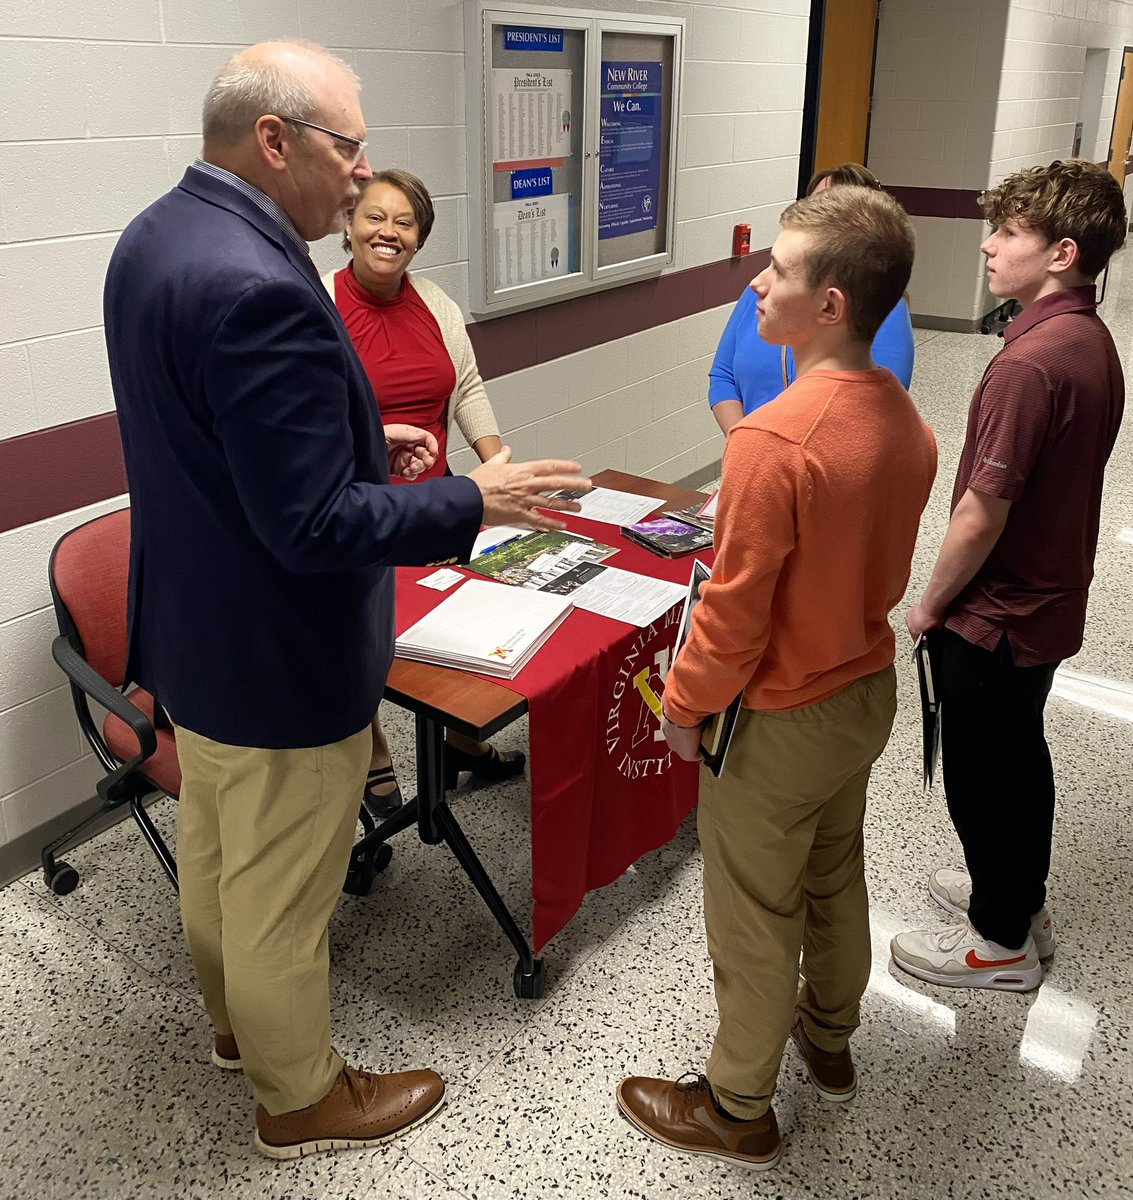 Over the weekend, I held my annual Service Academy Day for students to learn about the various U.S. Service Academies and ROTC programs. Thanks to all that attended!